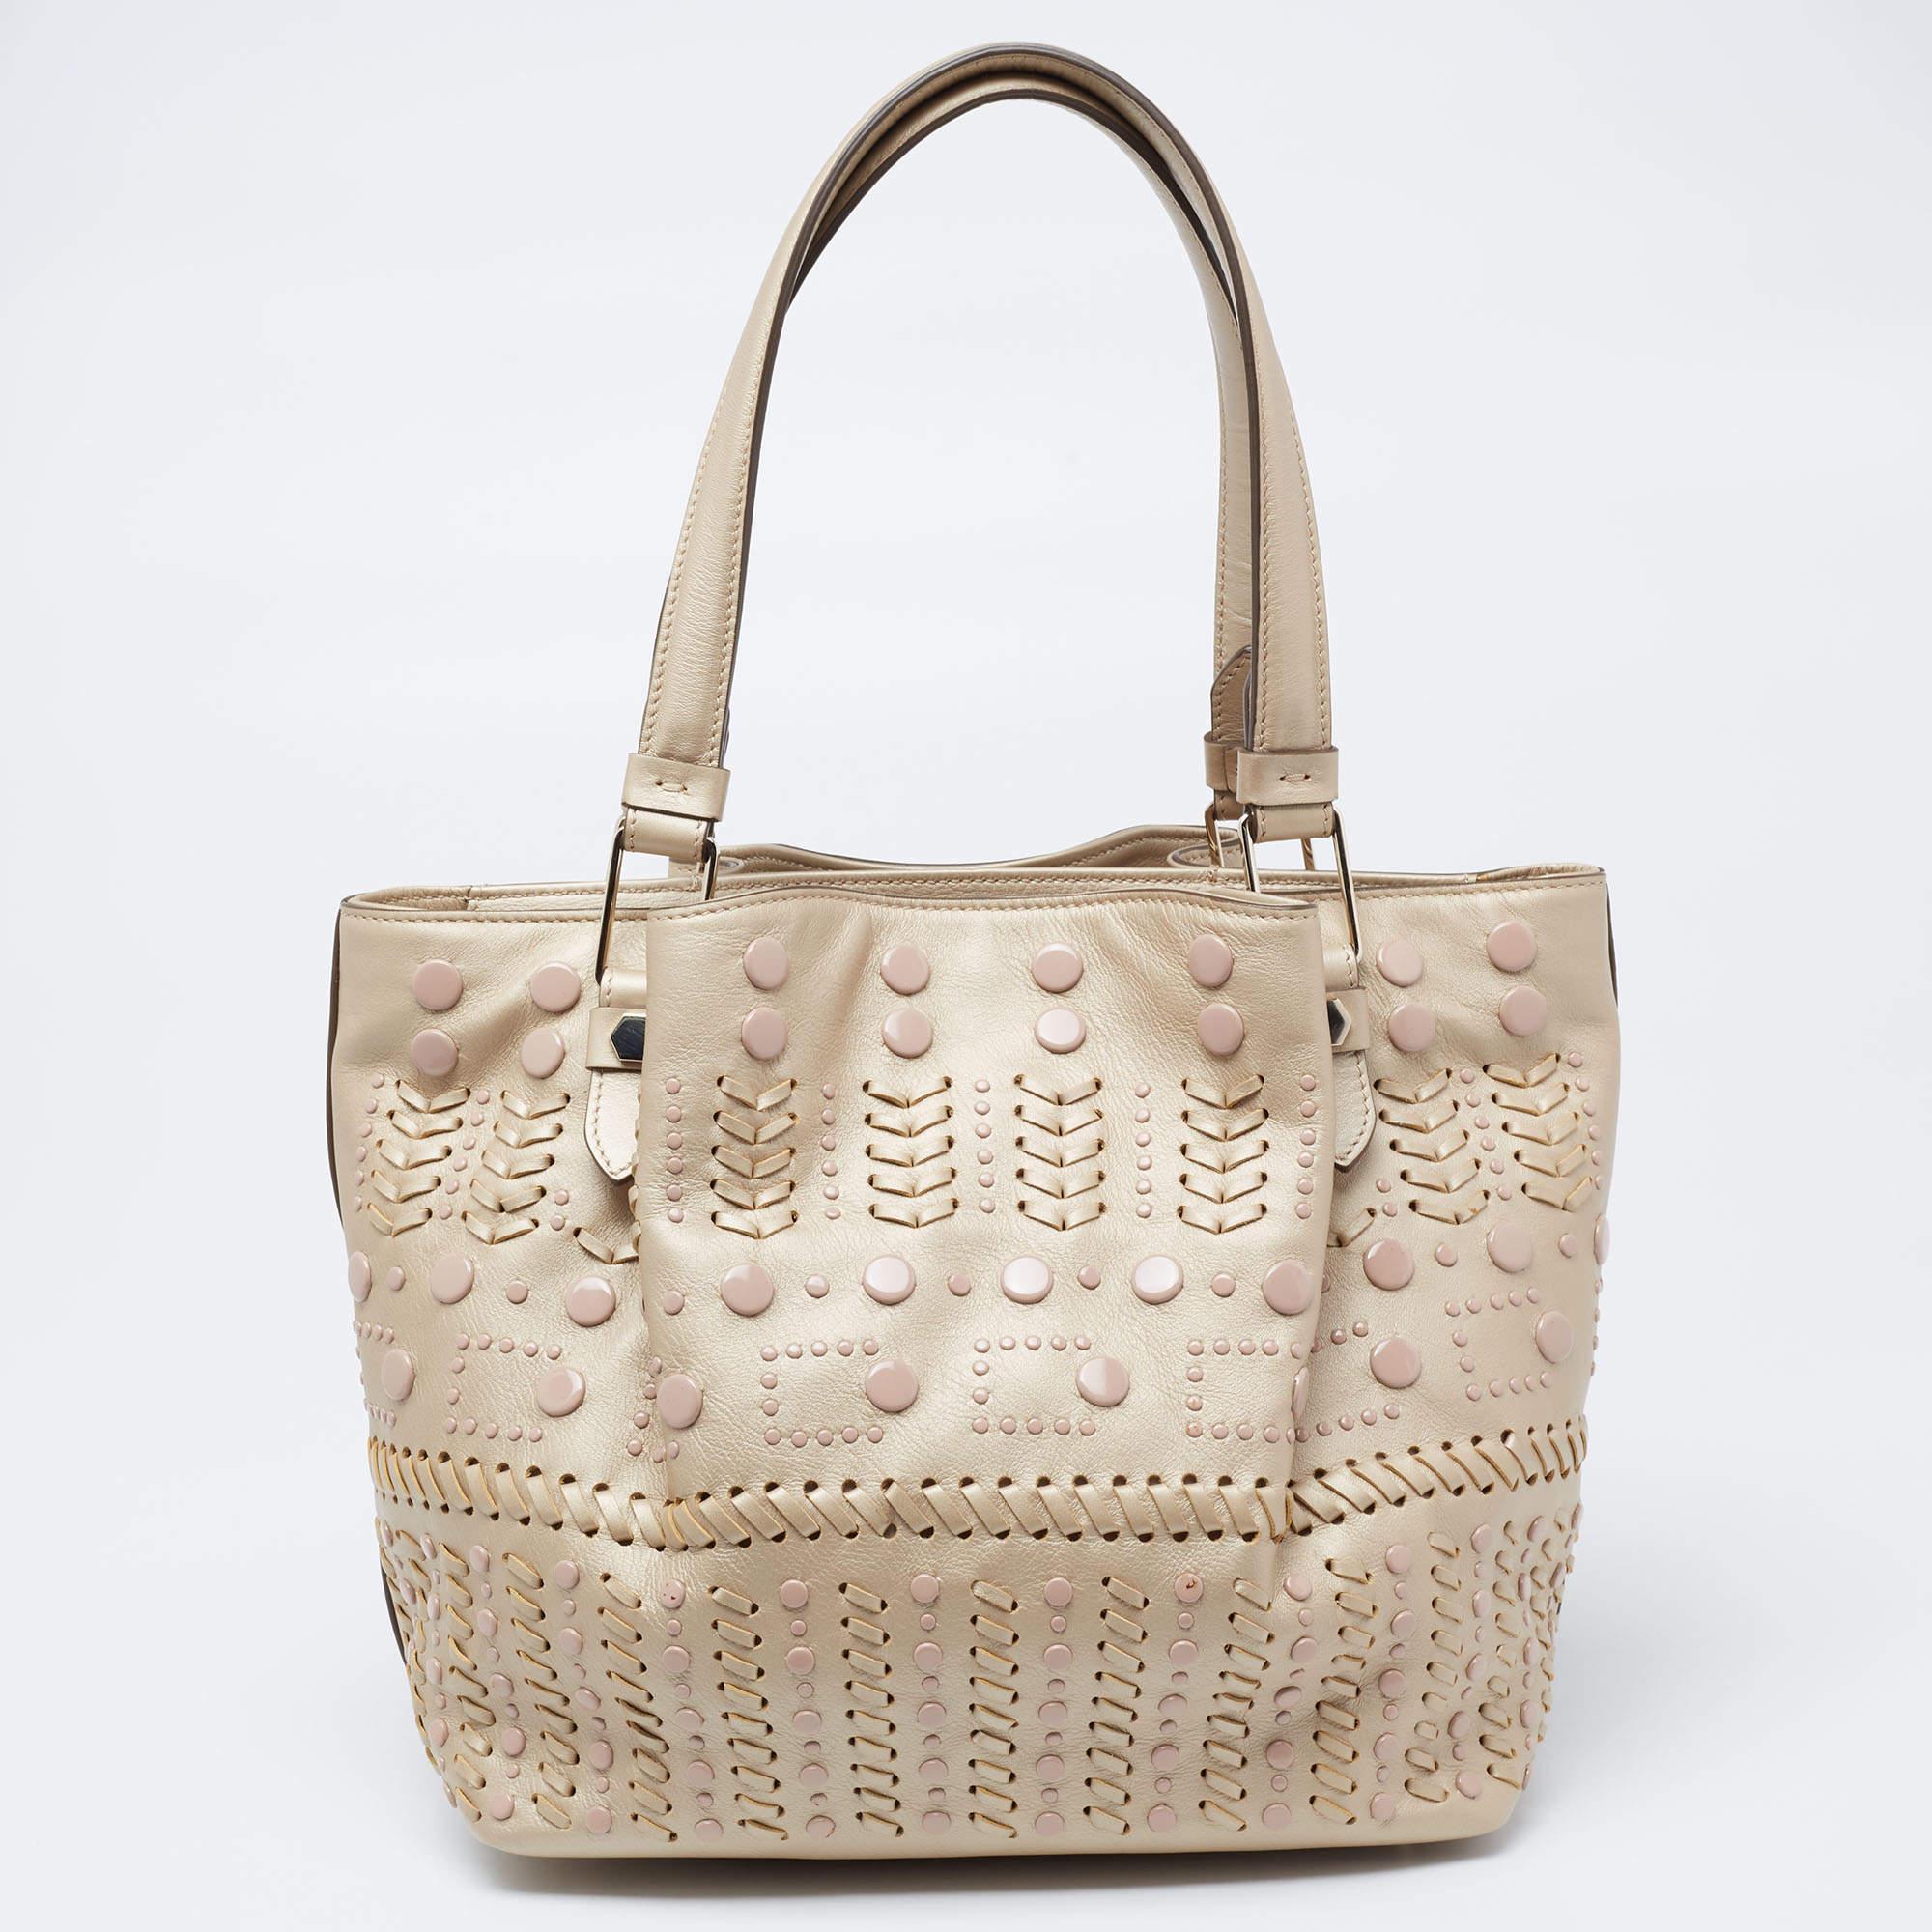 Tod's delivers a beautifully-made tote in metallic beige leather to assist you to work, lunch, or shopping. This tote is decorated with studs and sized spaciously for neatly housing your belongings. Two handles on top allow easy carrying